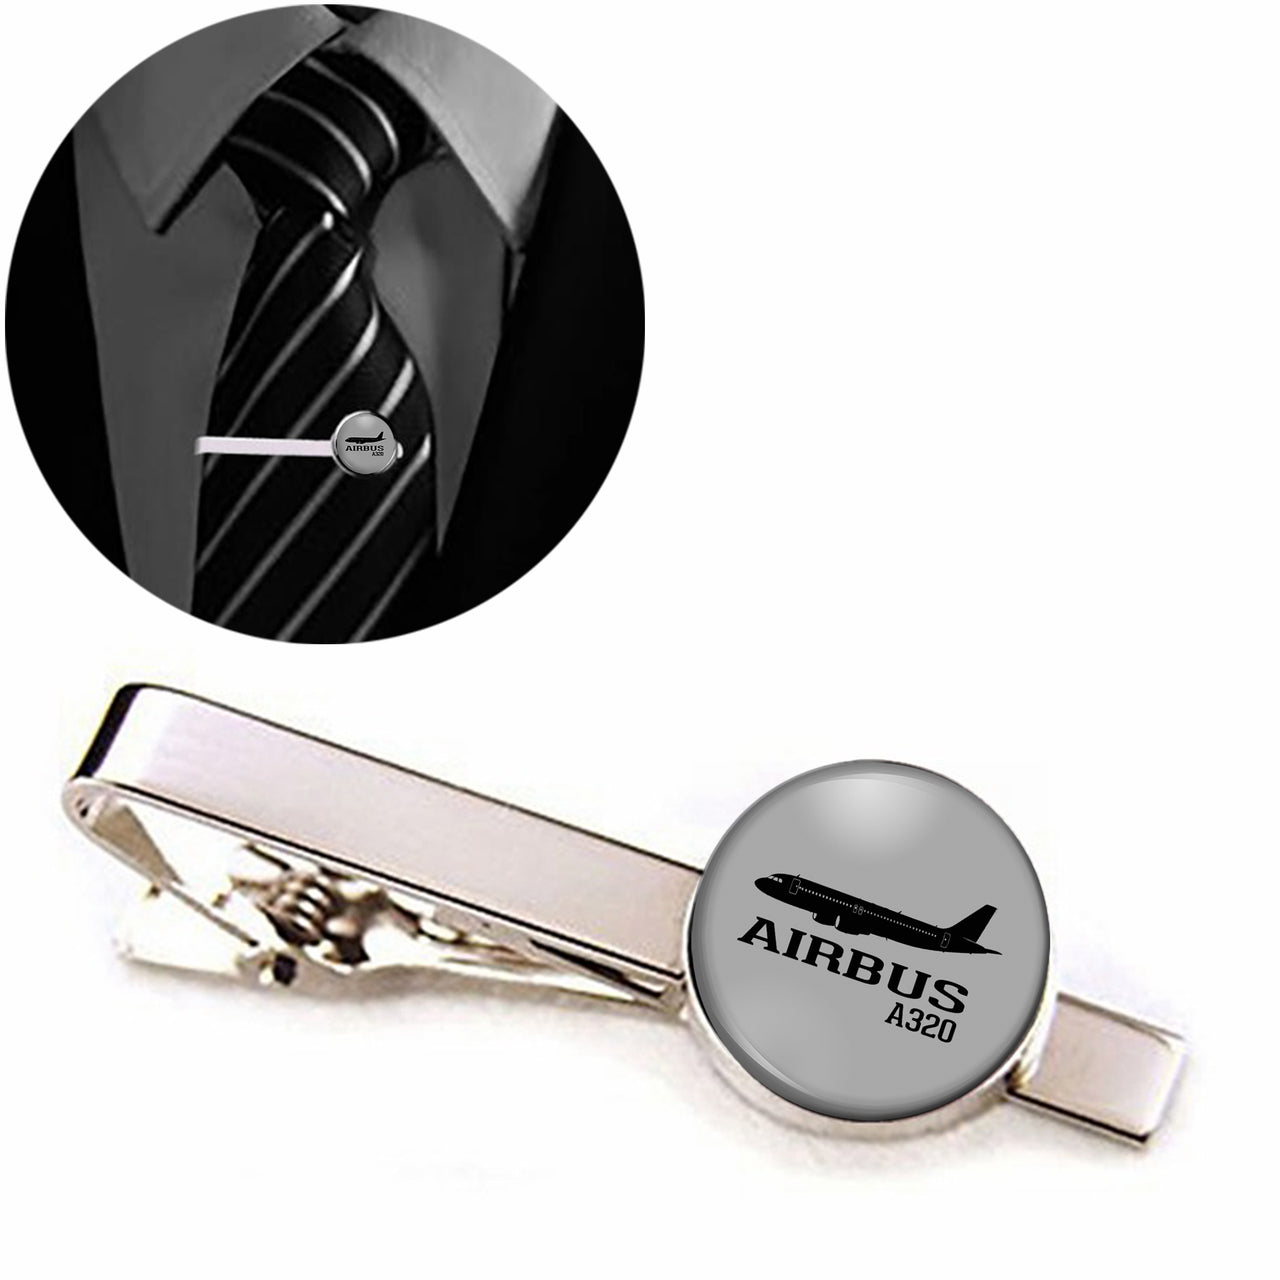 Airbus A320 Printed Designed Tie Clips